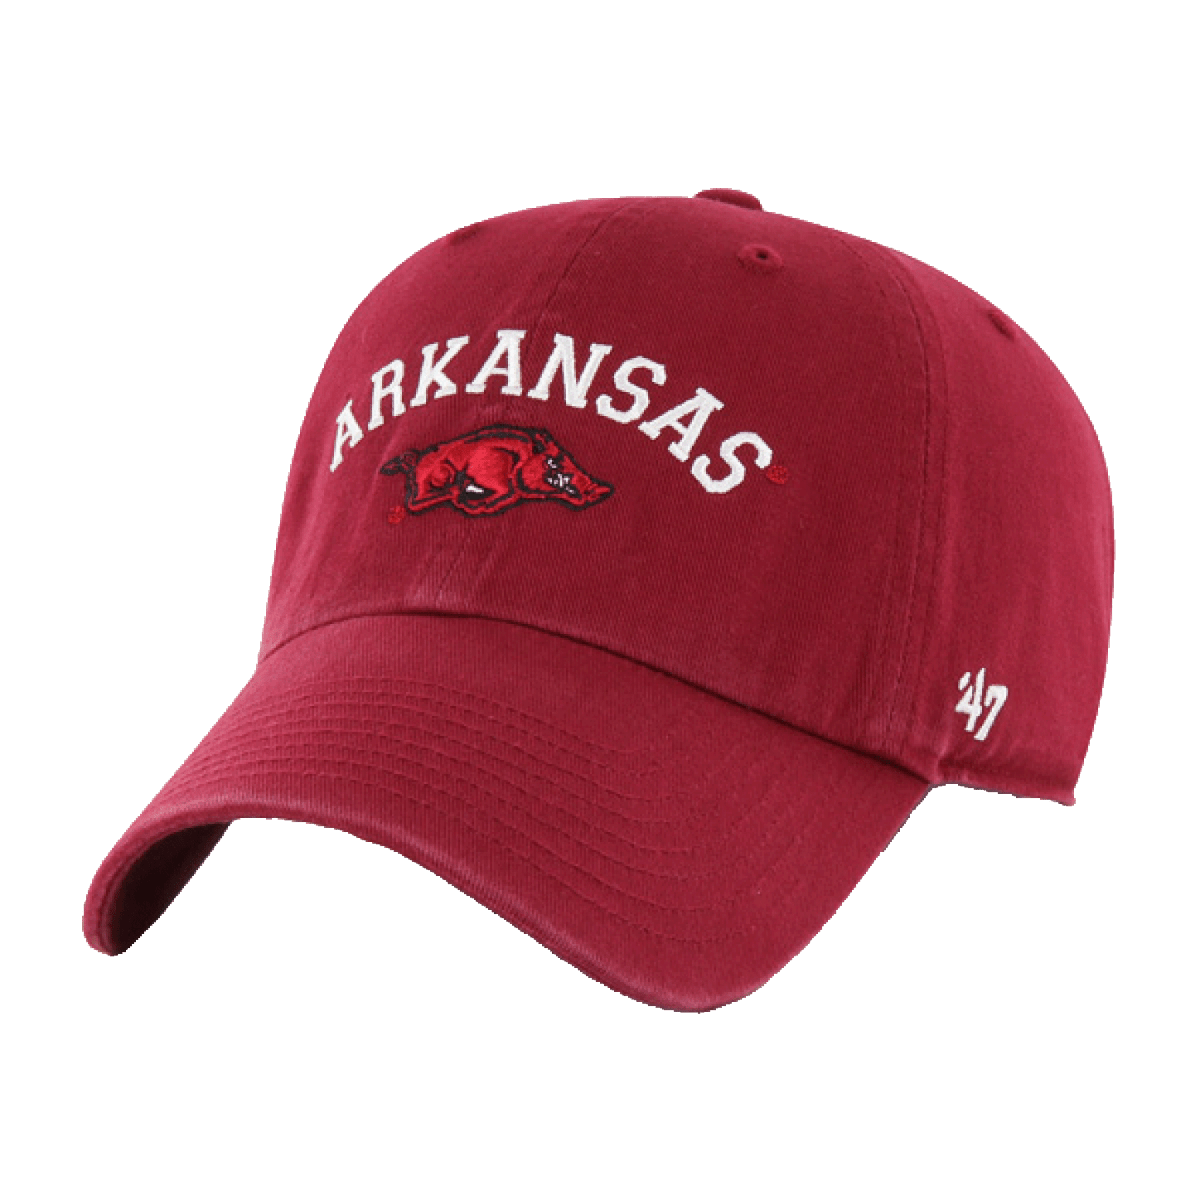 University of Arkansas 47 Brand Clean Up All Hat - Shop B-Unlimited